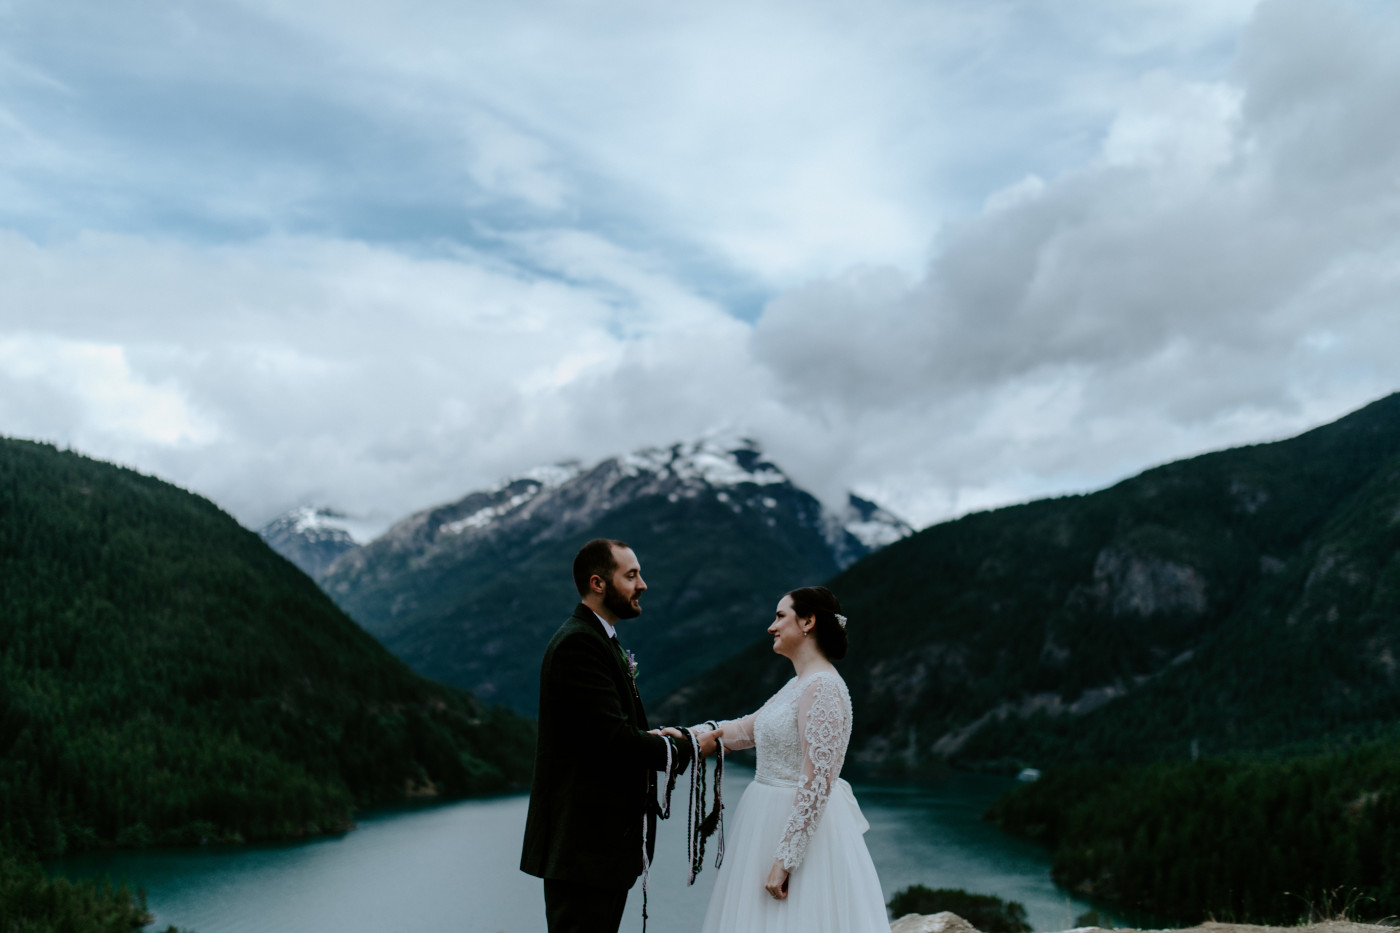 Alex and Elizabeth finalizing their elopement ceremony. Elopement photography at North Cascades National Park by Sienna Plus Josh.